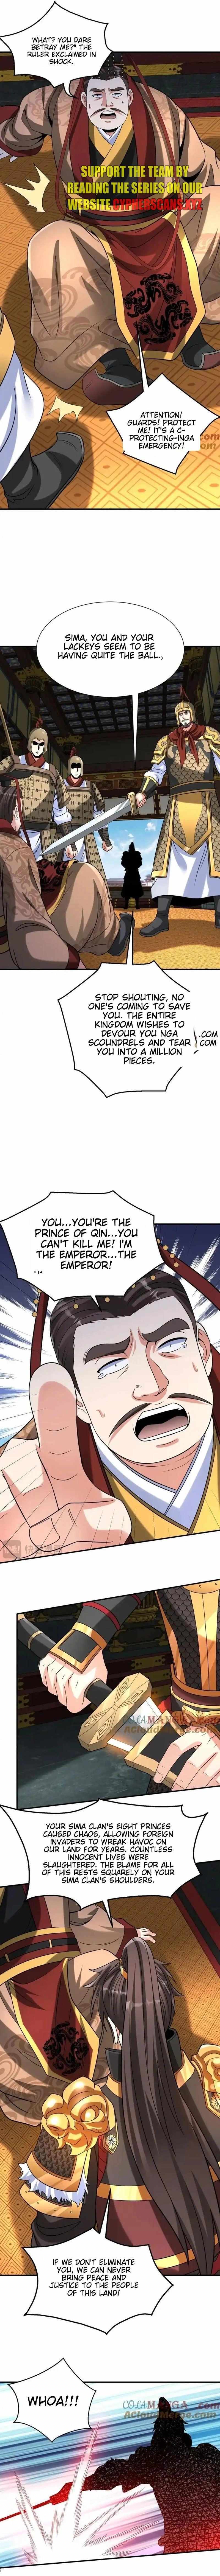 The Son Of The First Emperor Kills Enemies And Becomes A God - 123 page 5-a7fd131e